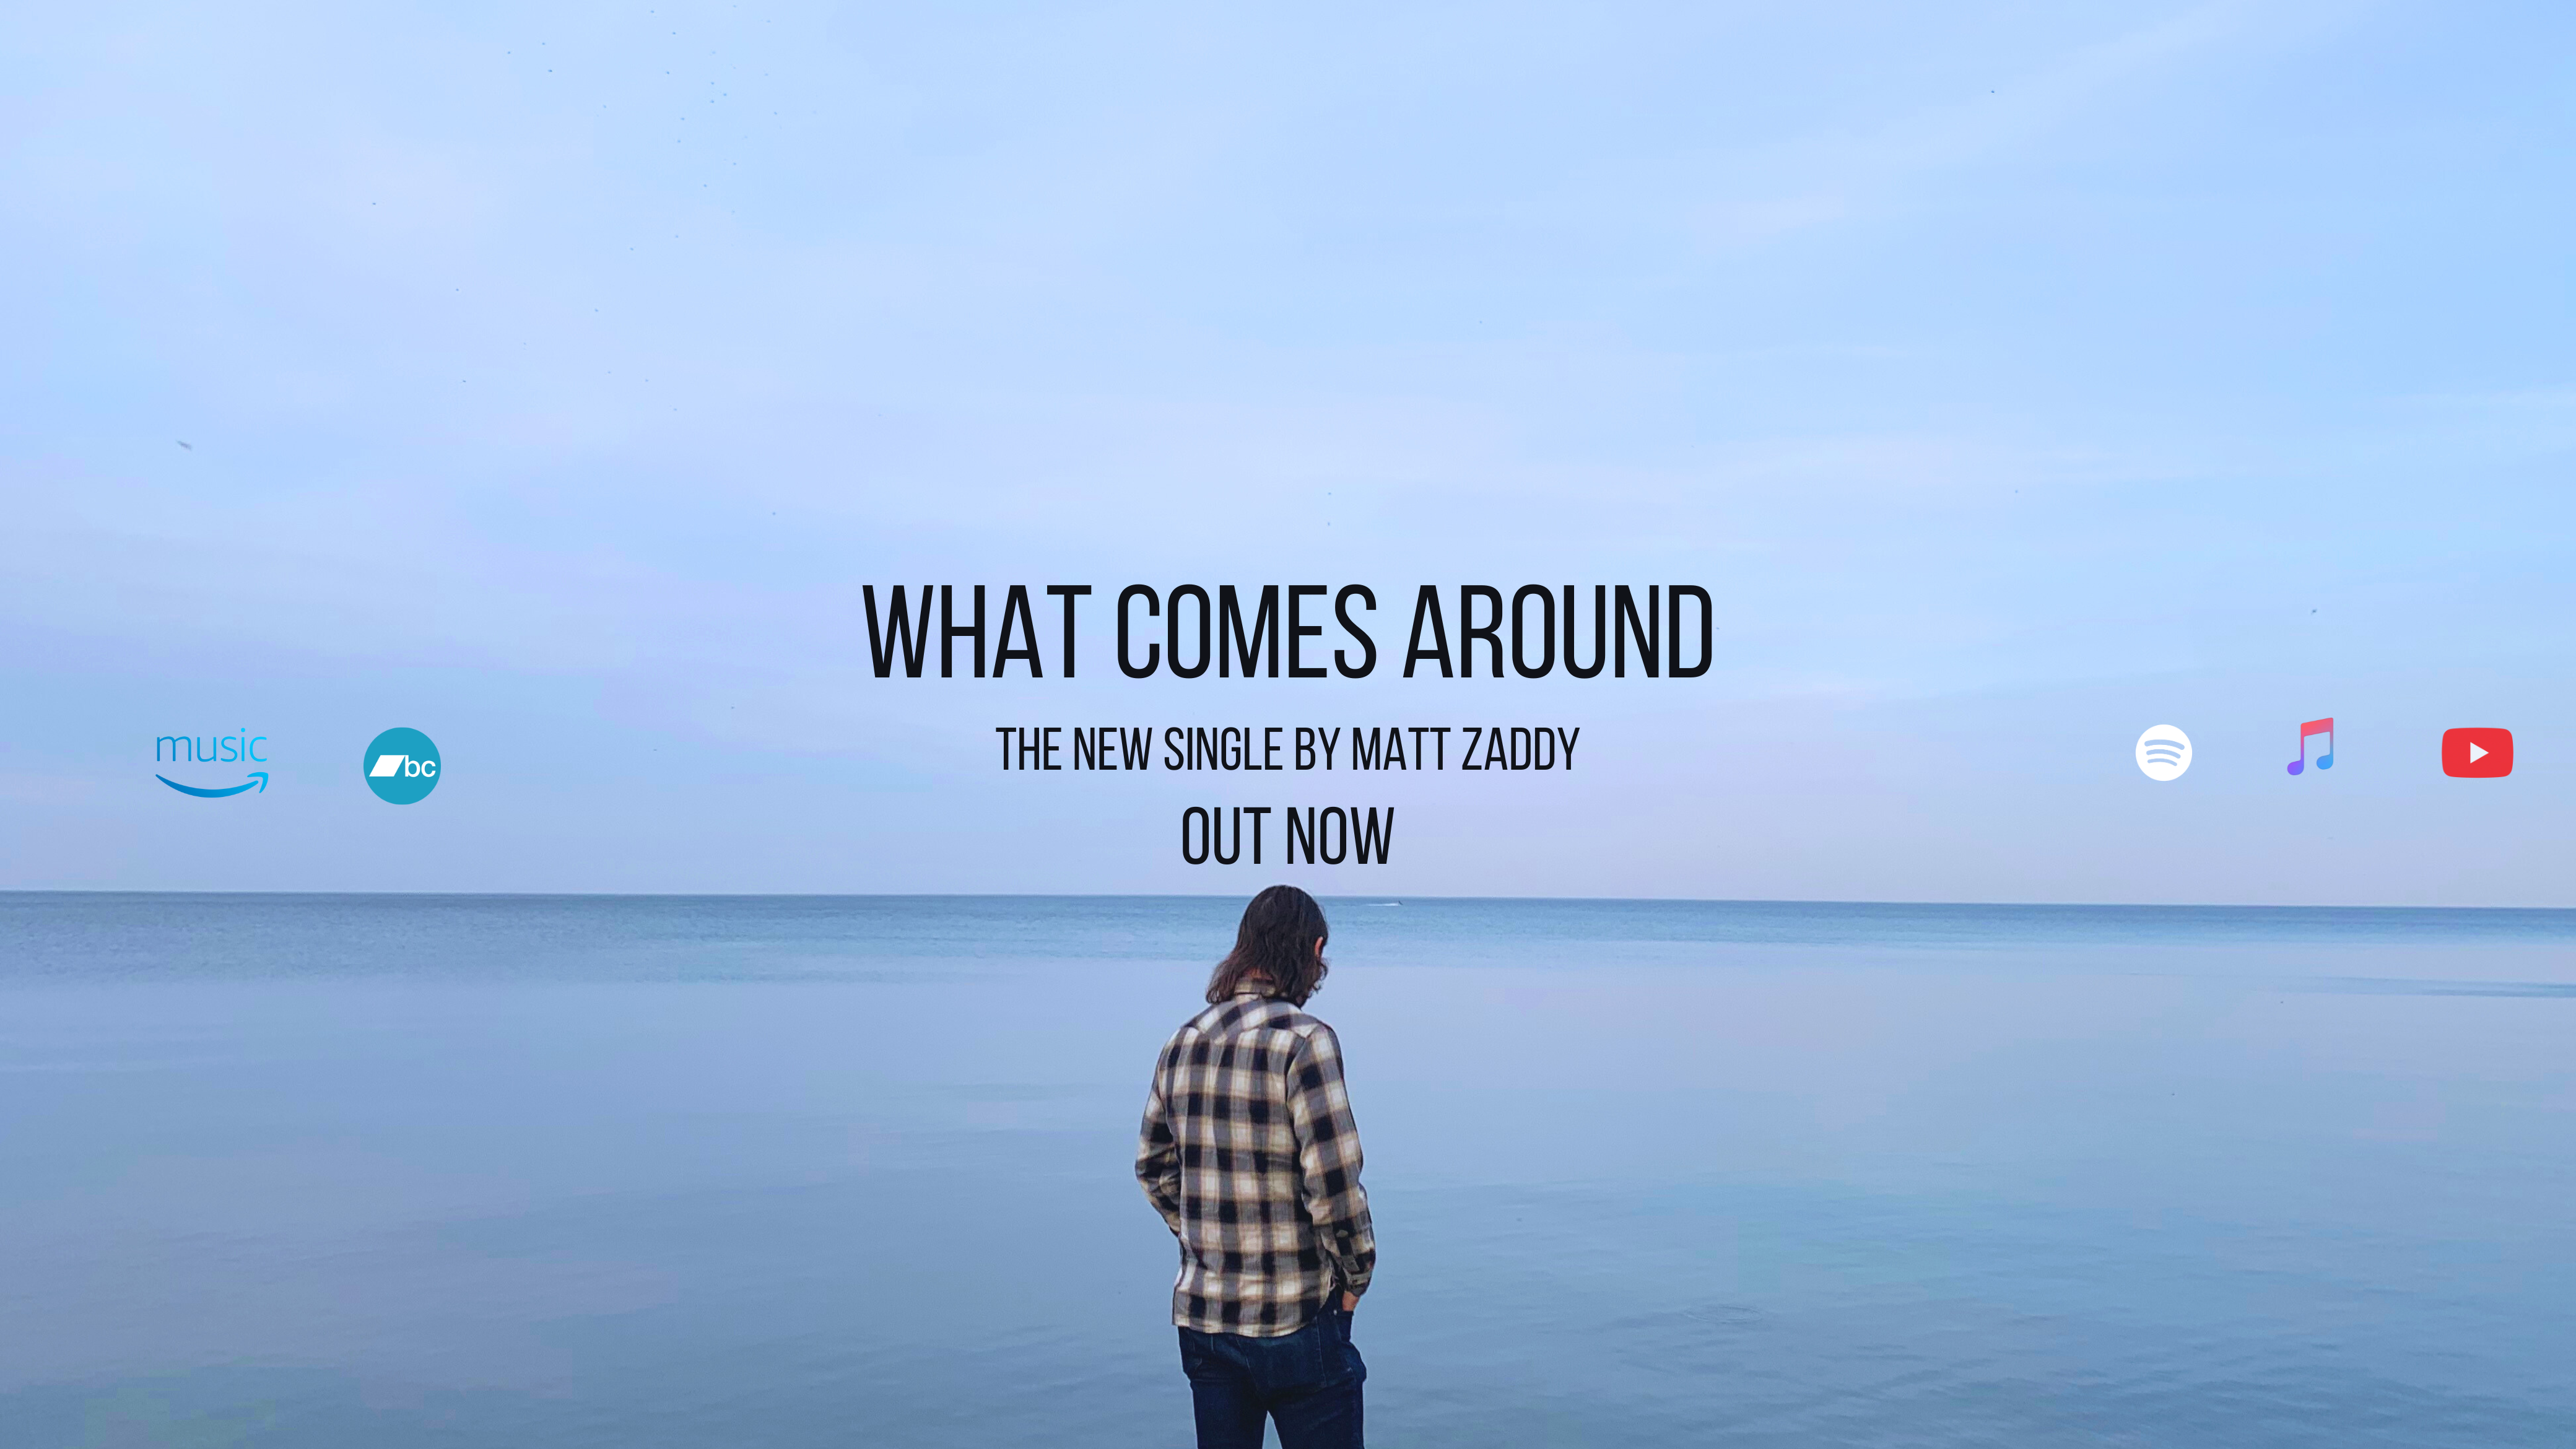 NEW MUSIC ALERT – Matt Zaddy’s latest single, ‘What Comes Around’ is out now!